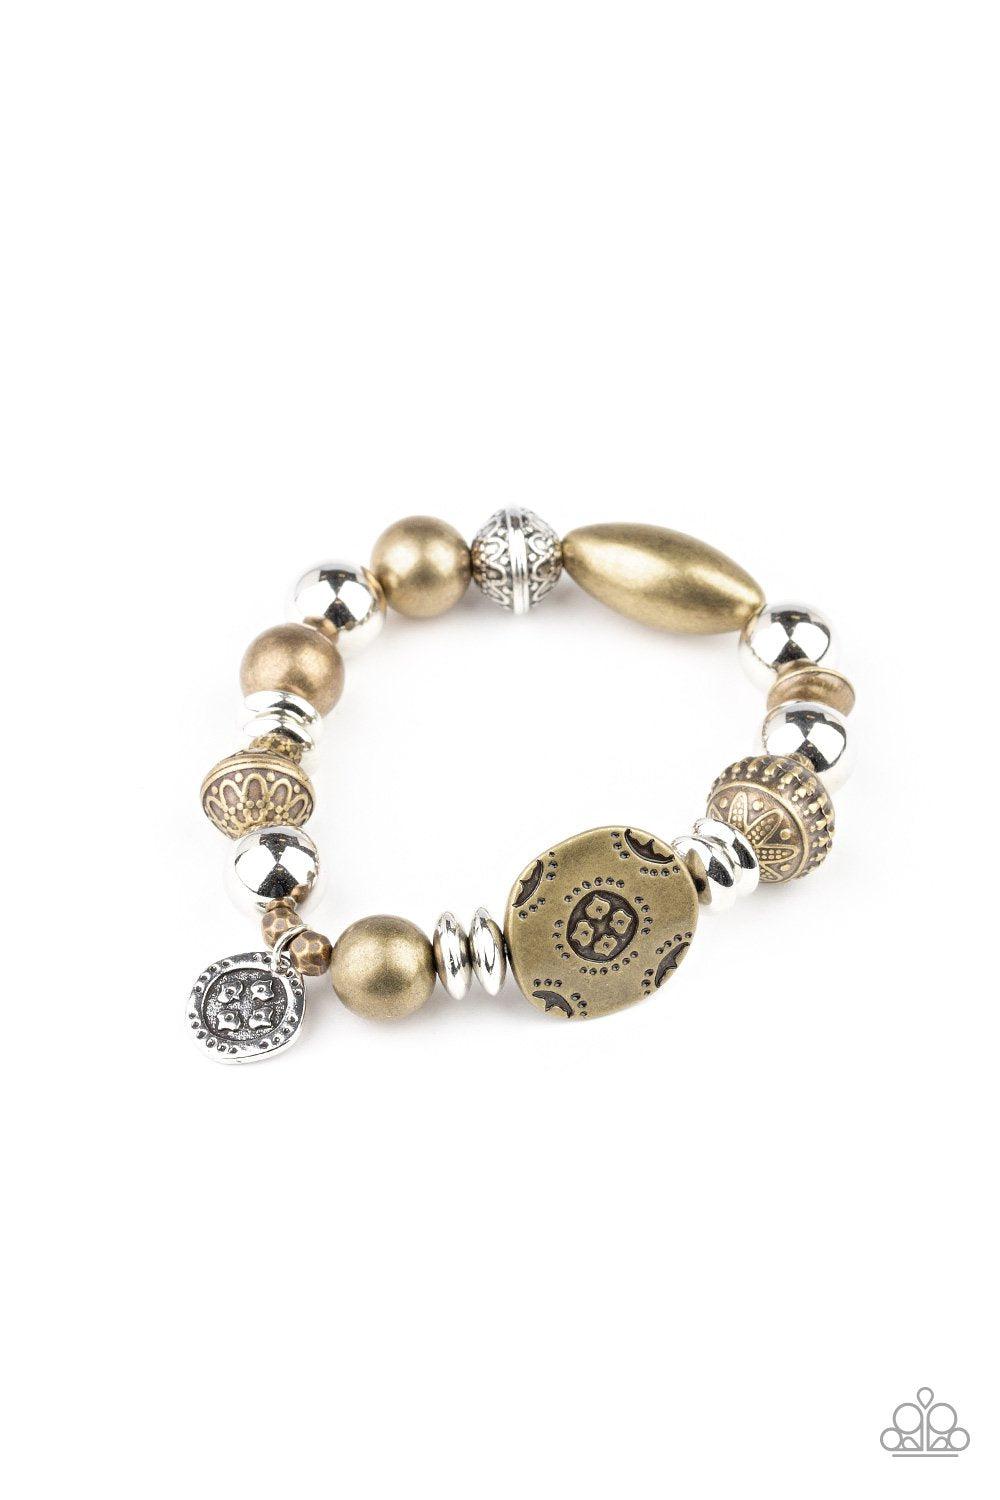 Aesthetic Appeal Multi Brass and Silver Stretch Bracelet- Paparazzi Accessories-CarasShop.com - $5 Jewelry by Cara Jewels